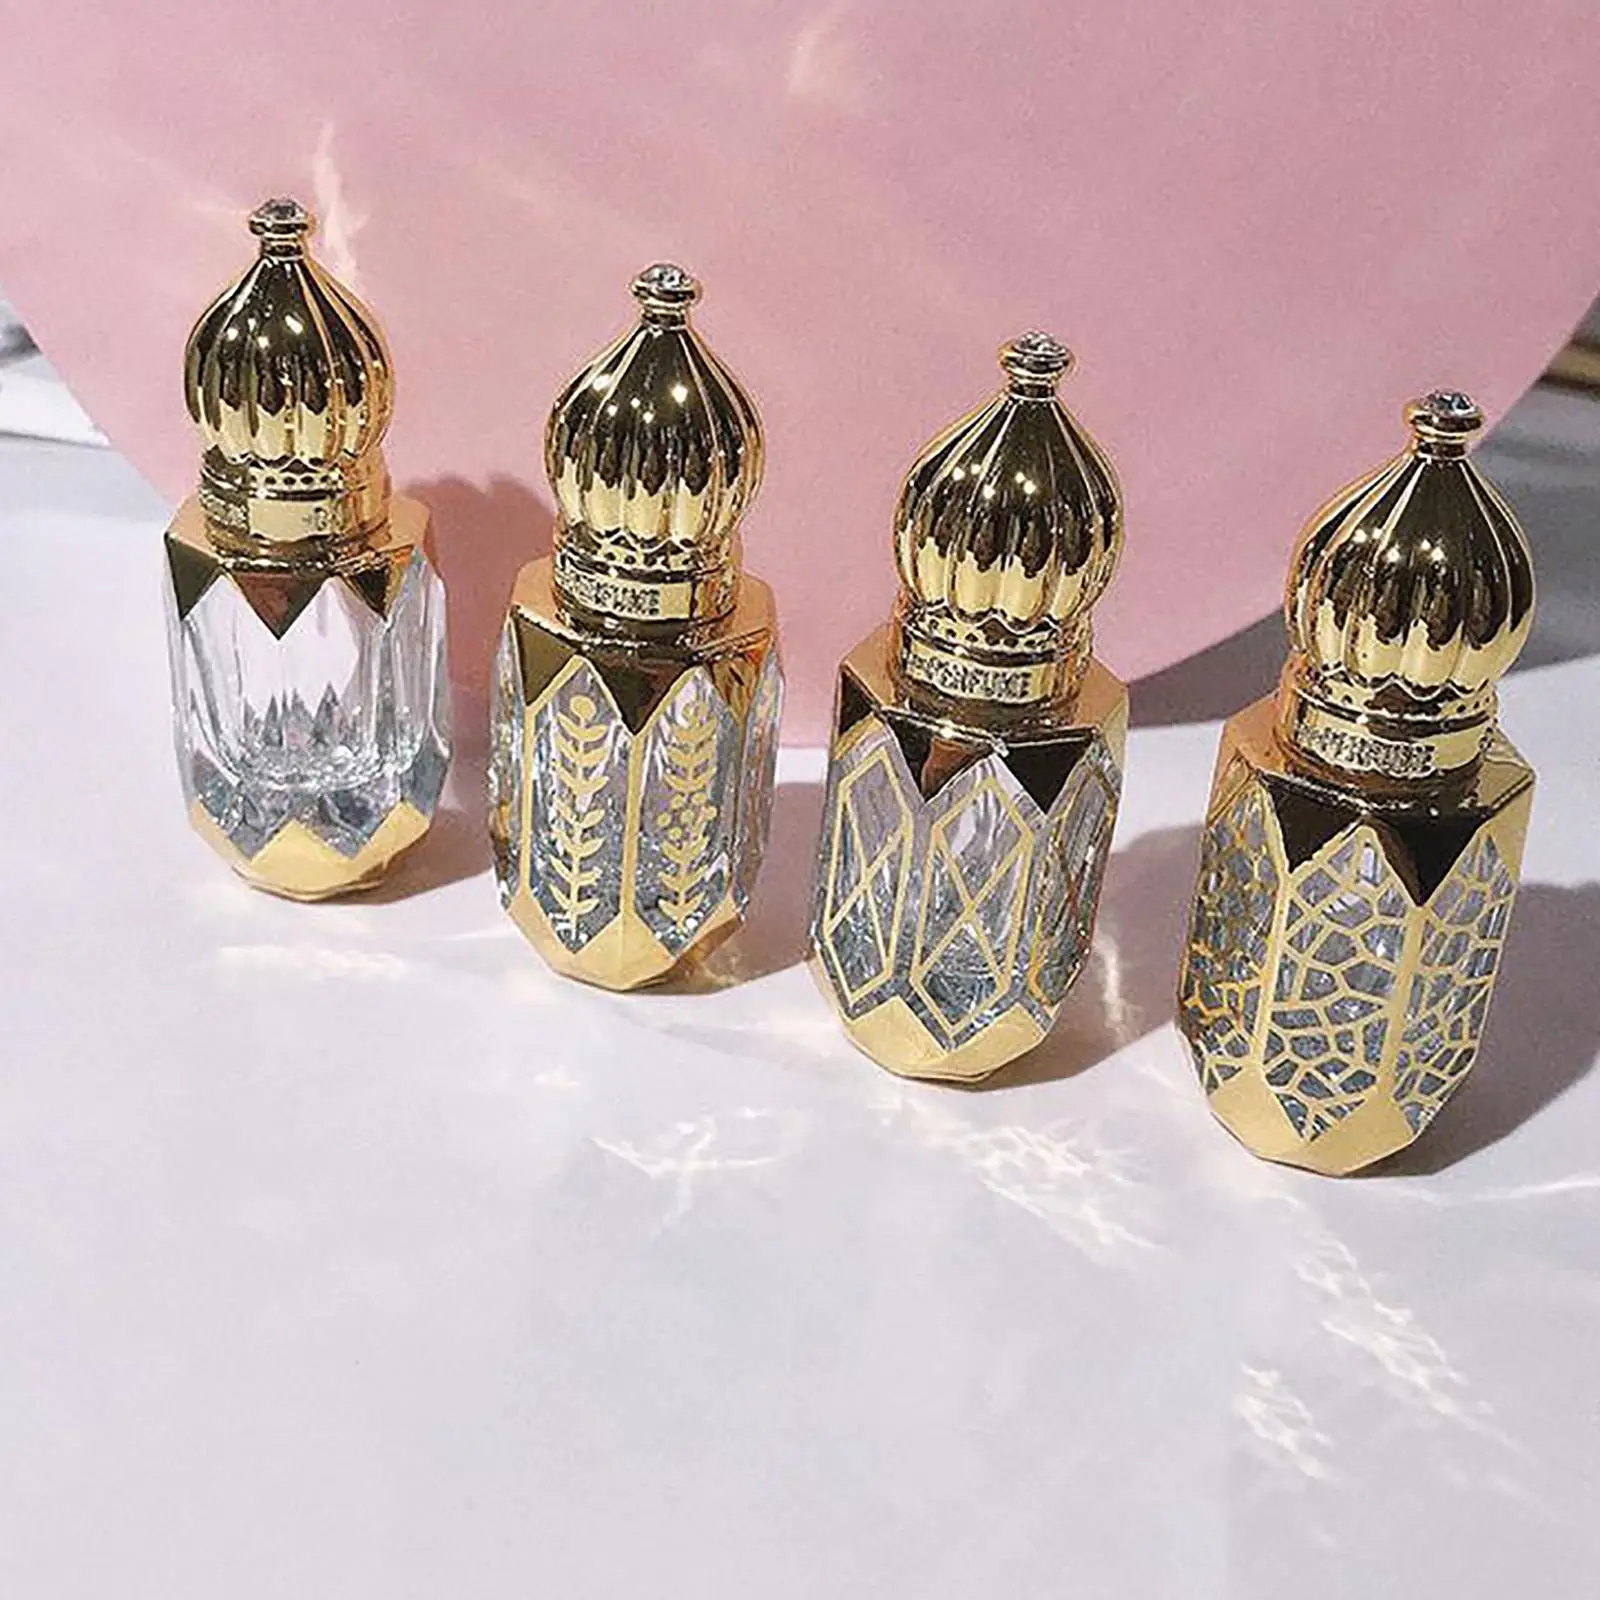 4 Pieces On Bottles Refillable Arabic Glass for Essential Oil